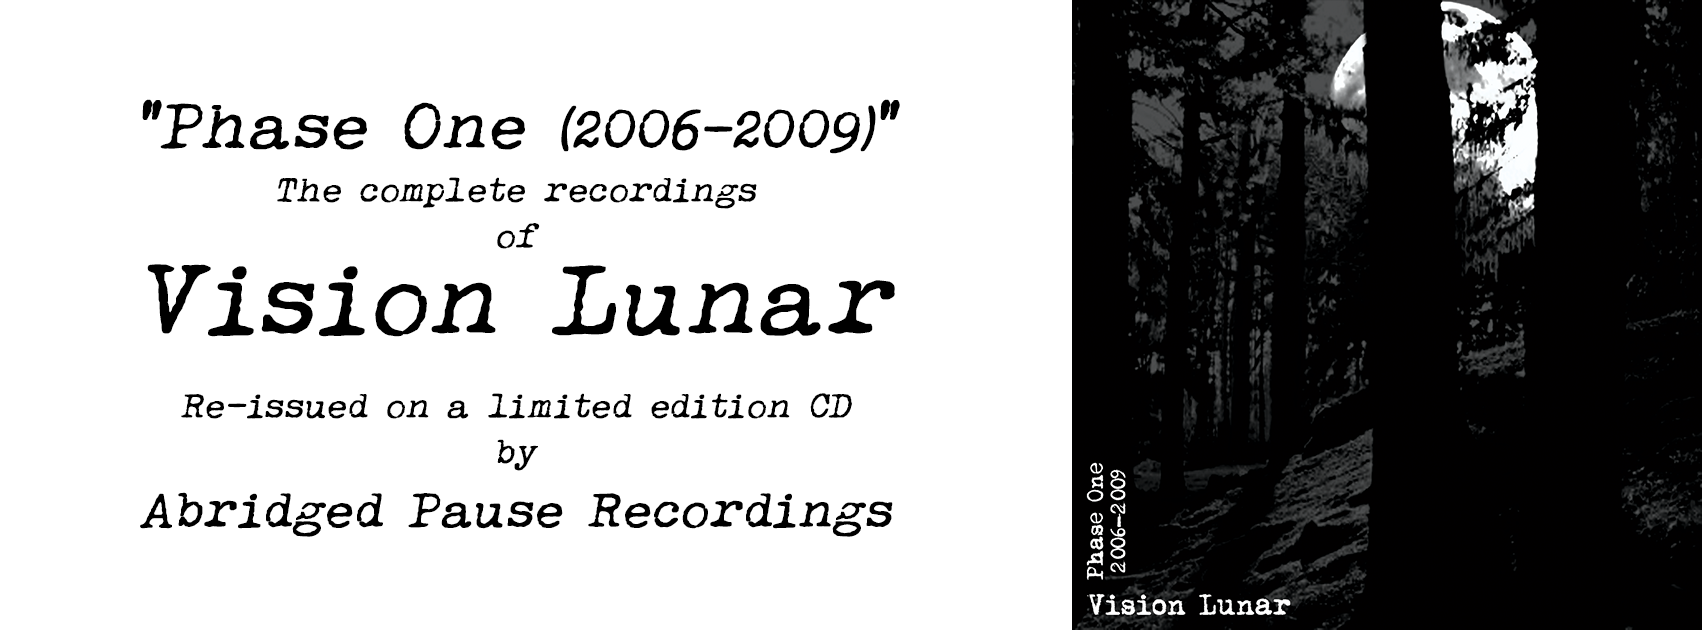 Ad for Vision Lunar “Phase One (2006-2009)” reissue, Abridged Pause Recordings.